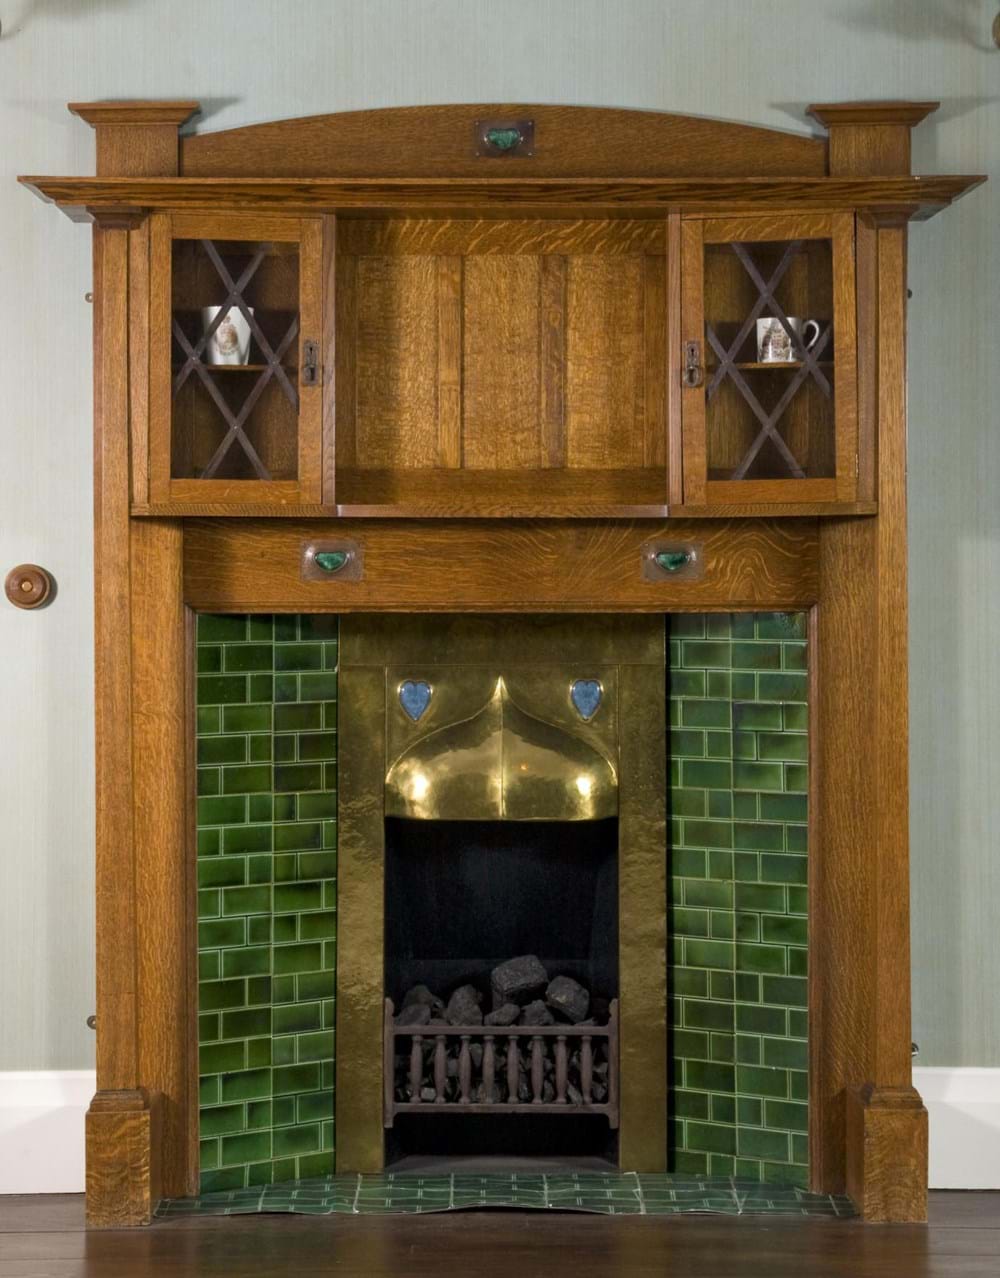 Wooden fireplace with green ceramic tiles